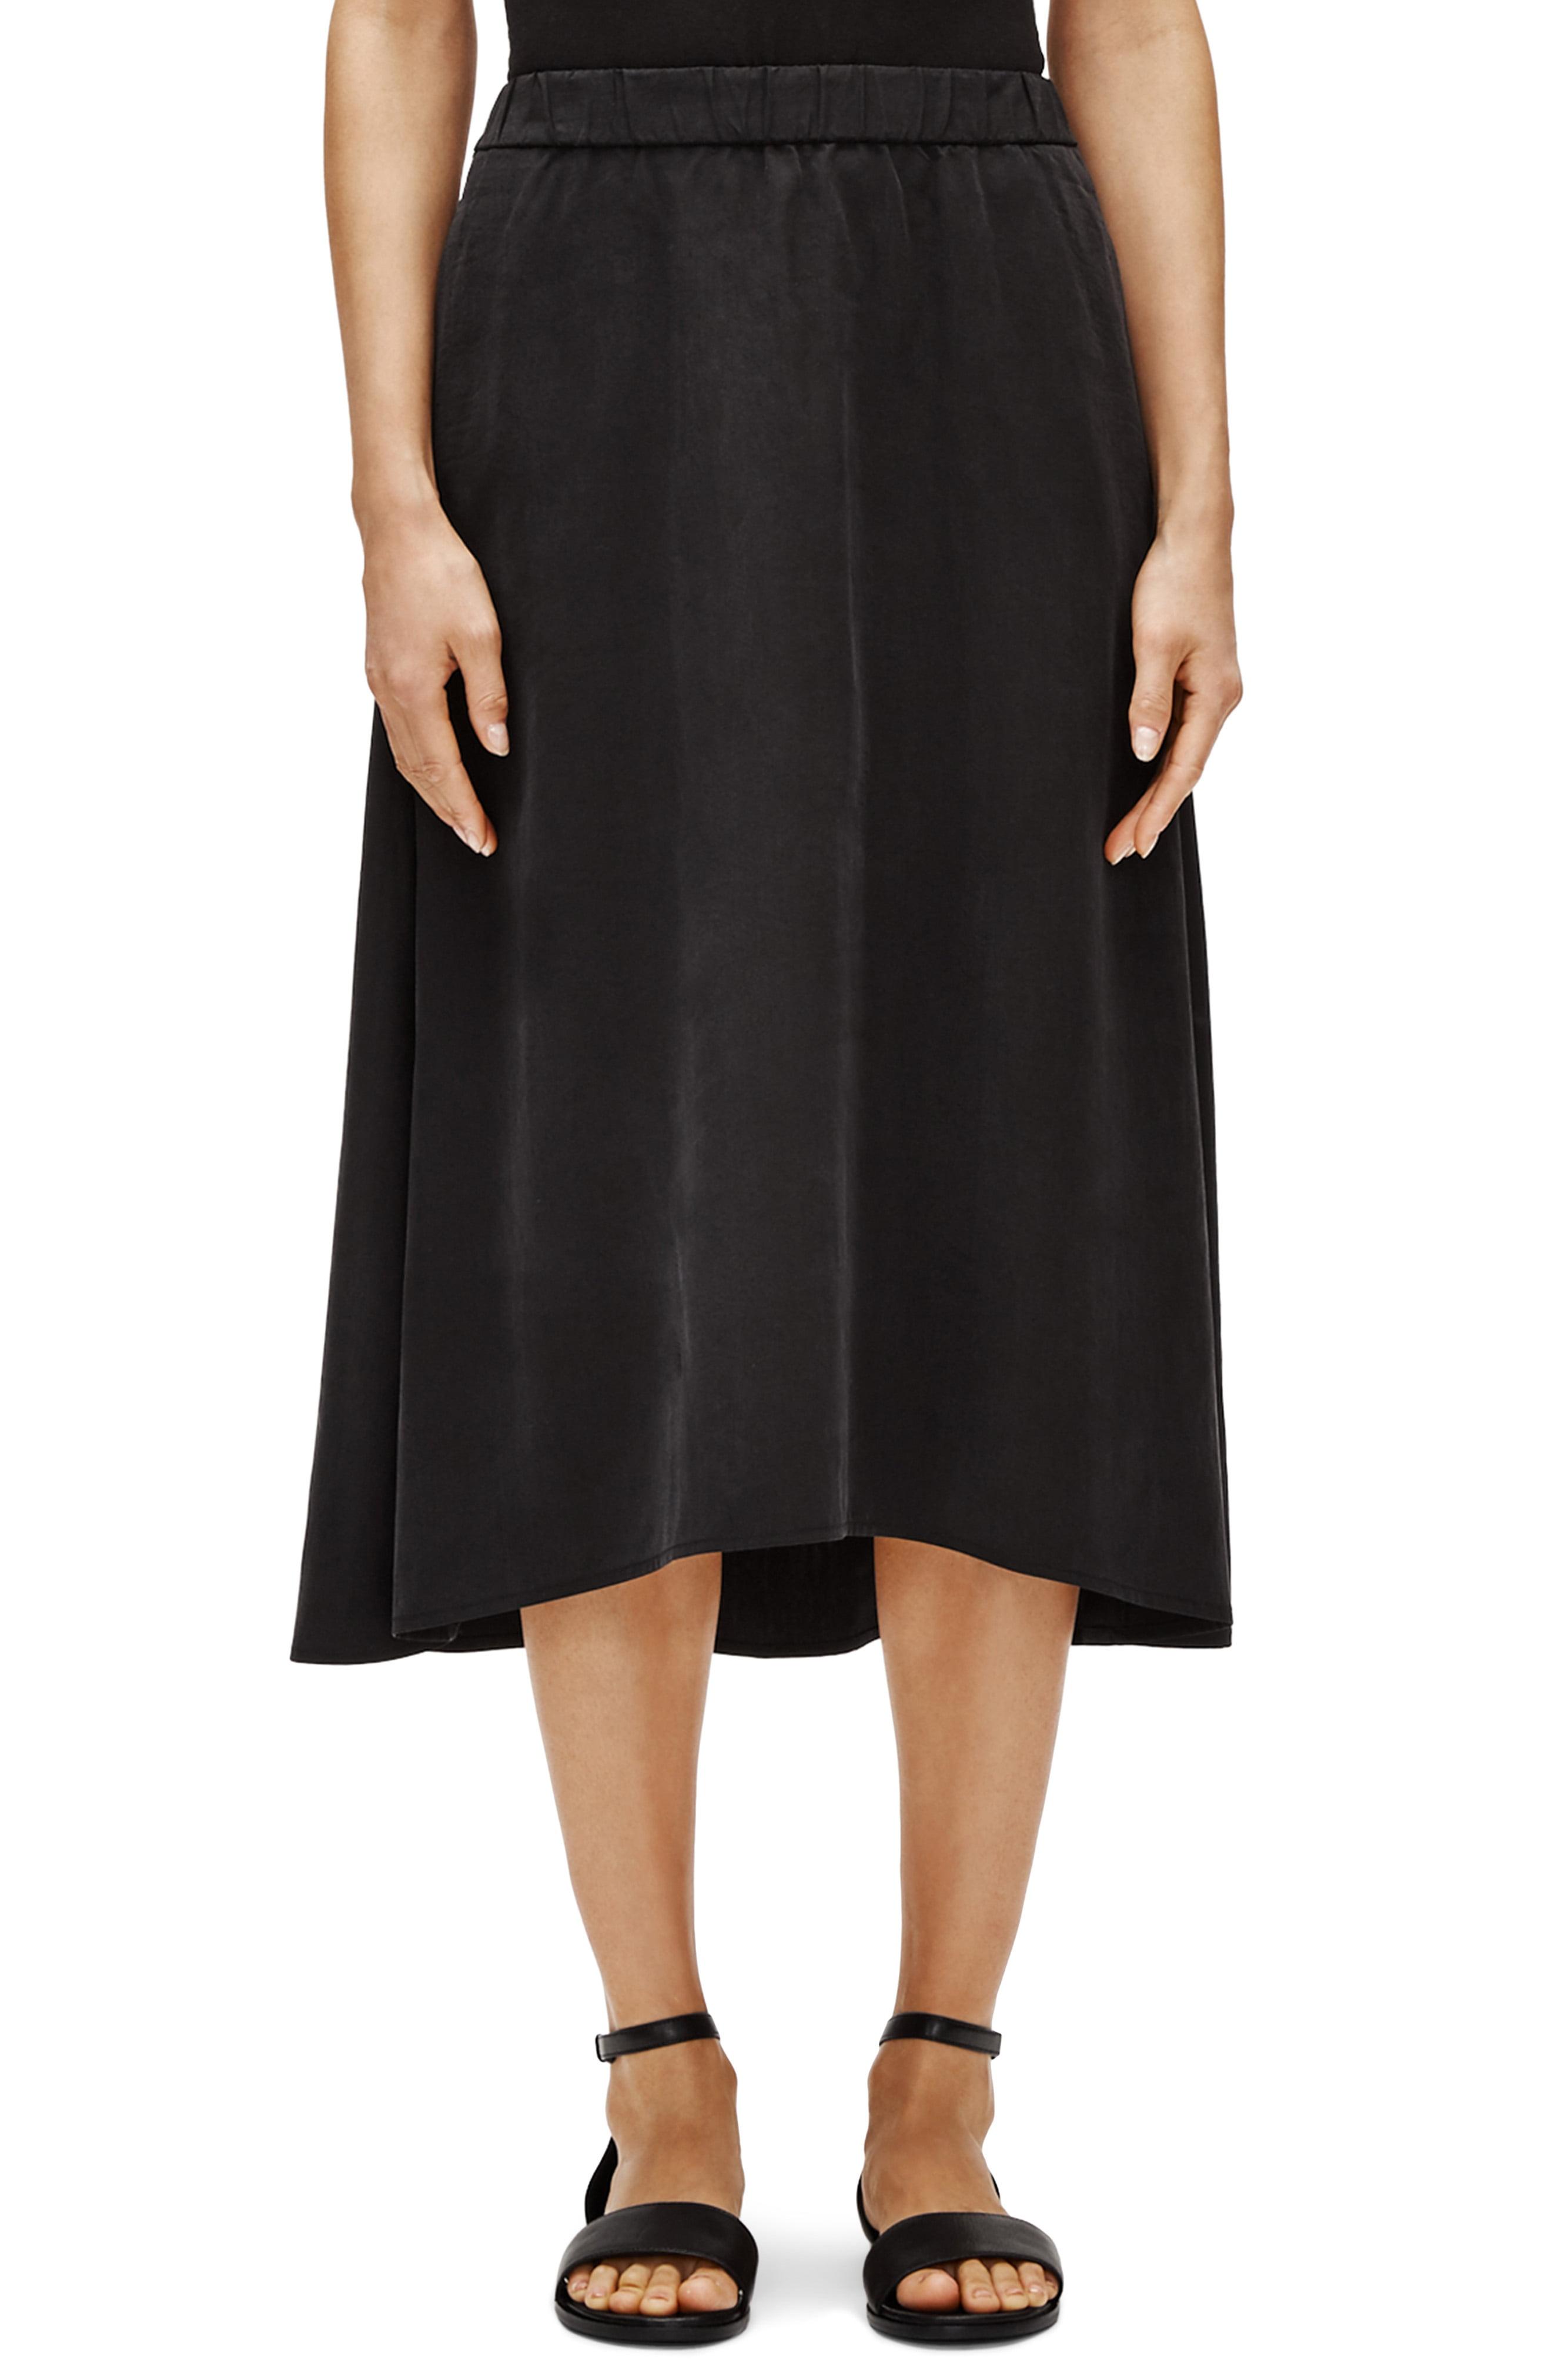 Eileen Fisher Synthetic A-line Skirt in Black - Lyst